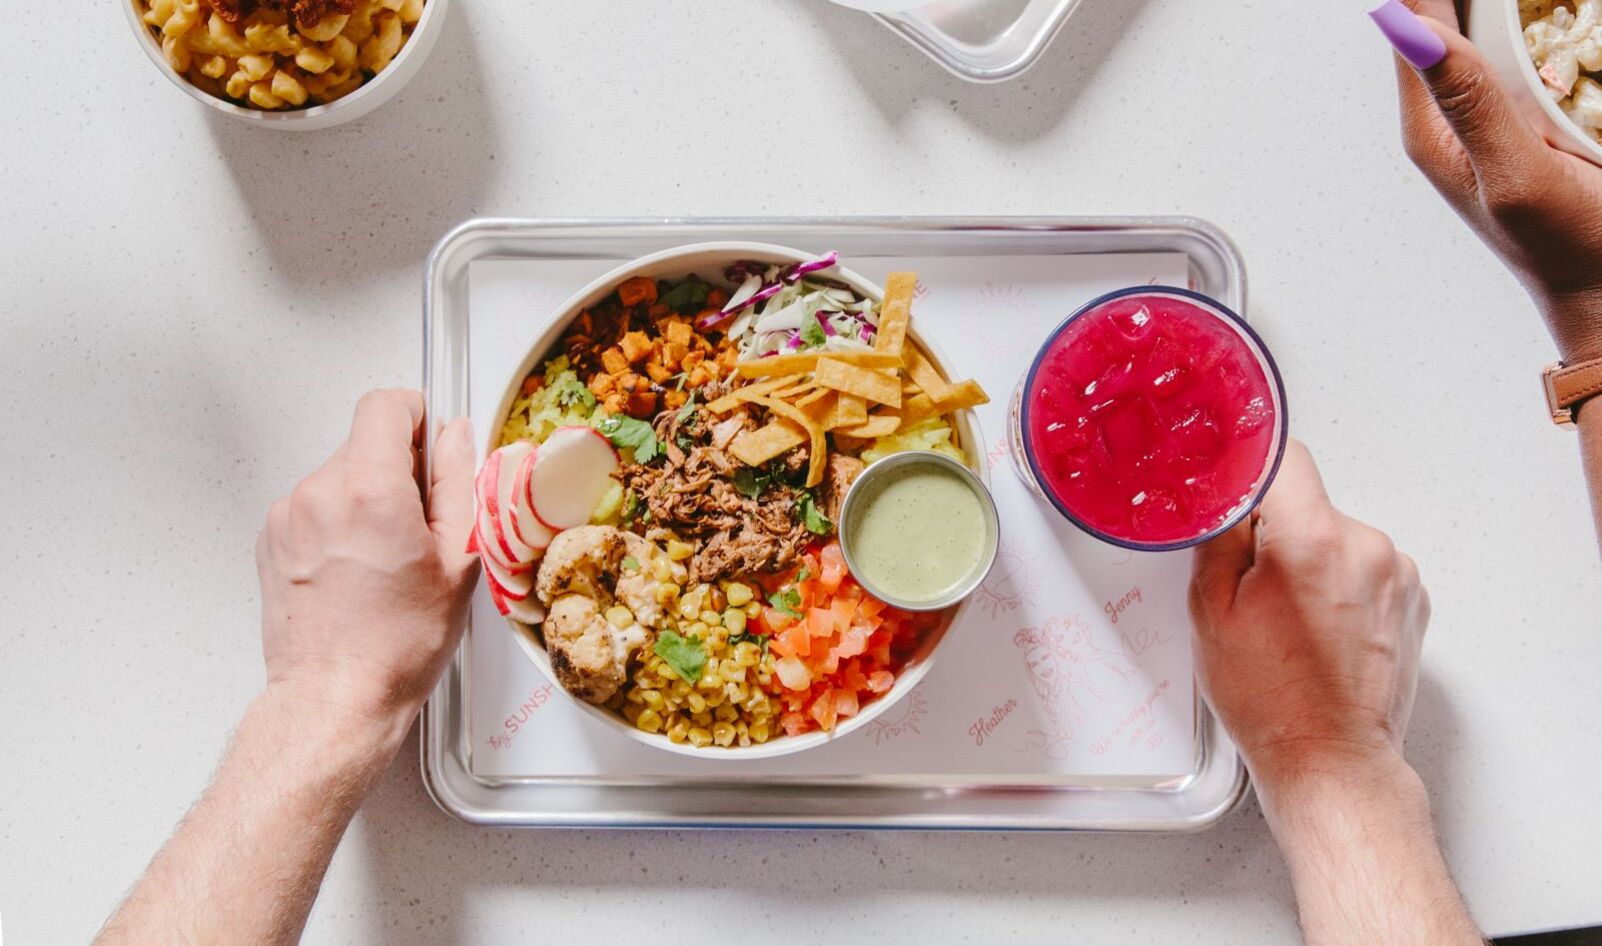 From Healthy to Indulgent, LA's Newest Vegan Restaurant Ticks All the Boxes